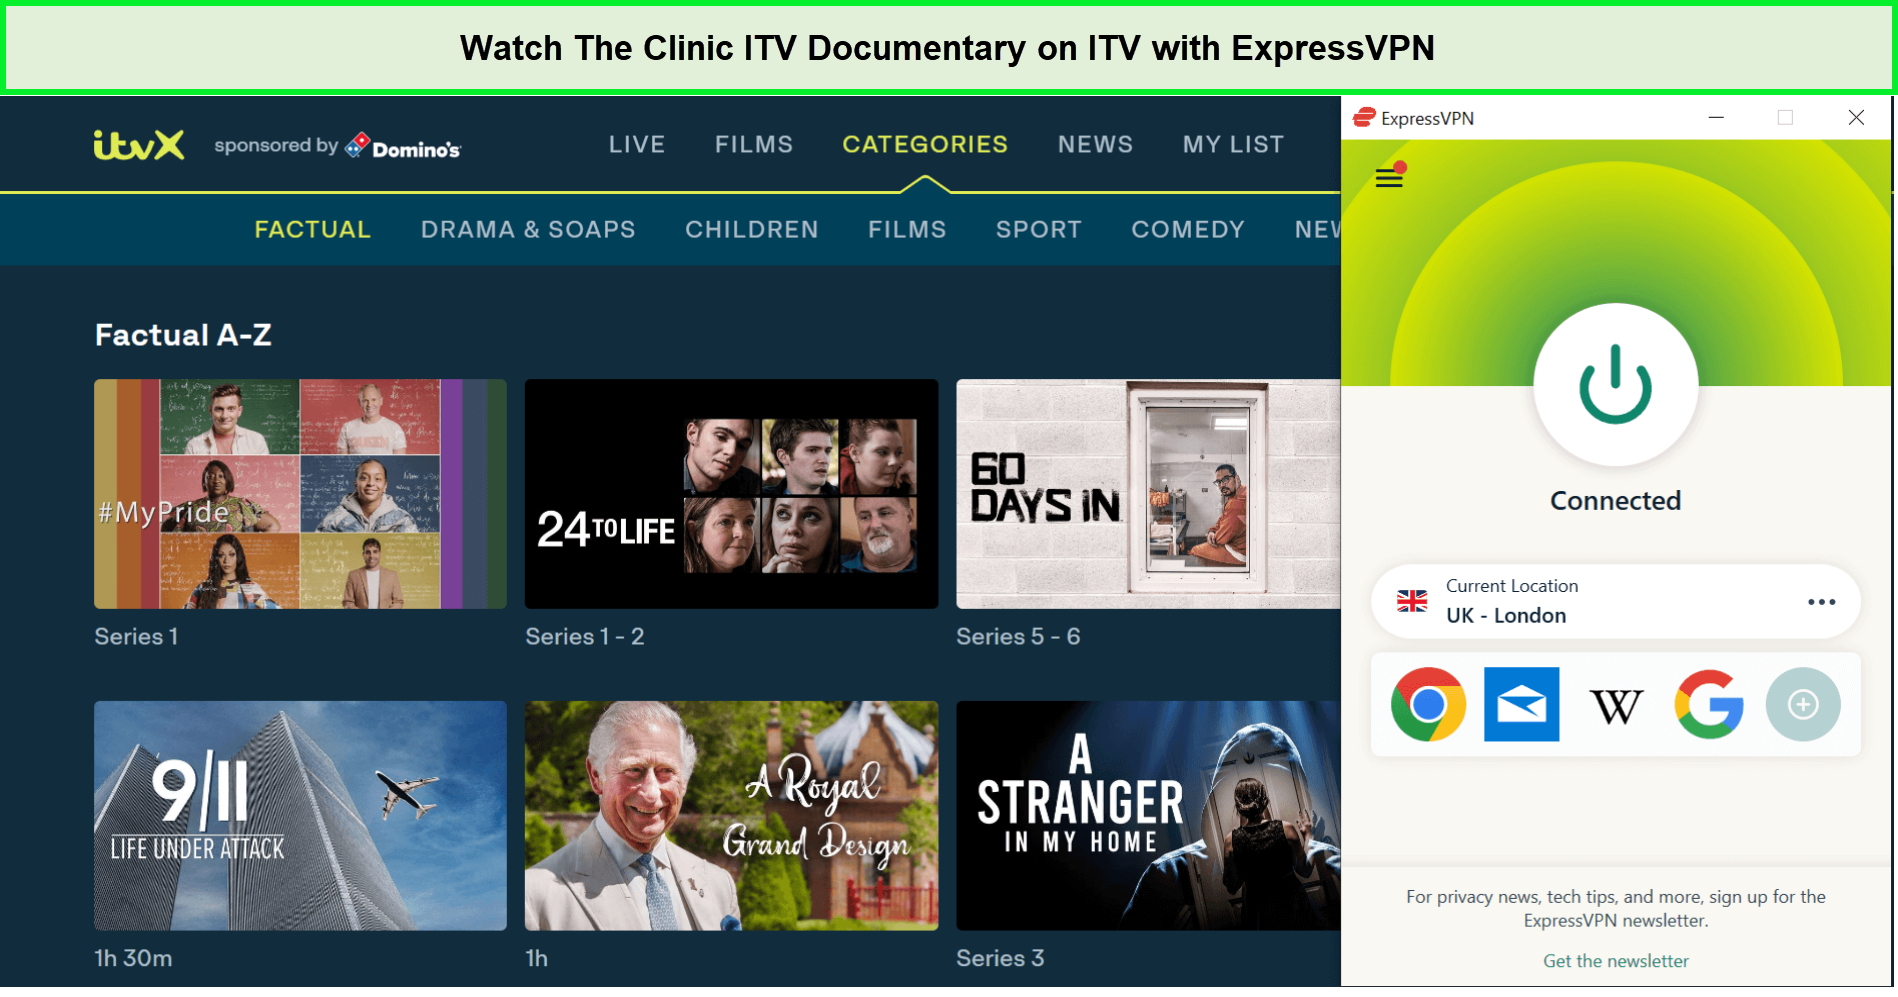 Watch-The-Clinic-ITV-Documentary-in-Singapore-on-ITV-with-ExpressVPN.